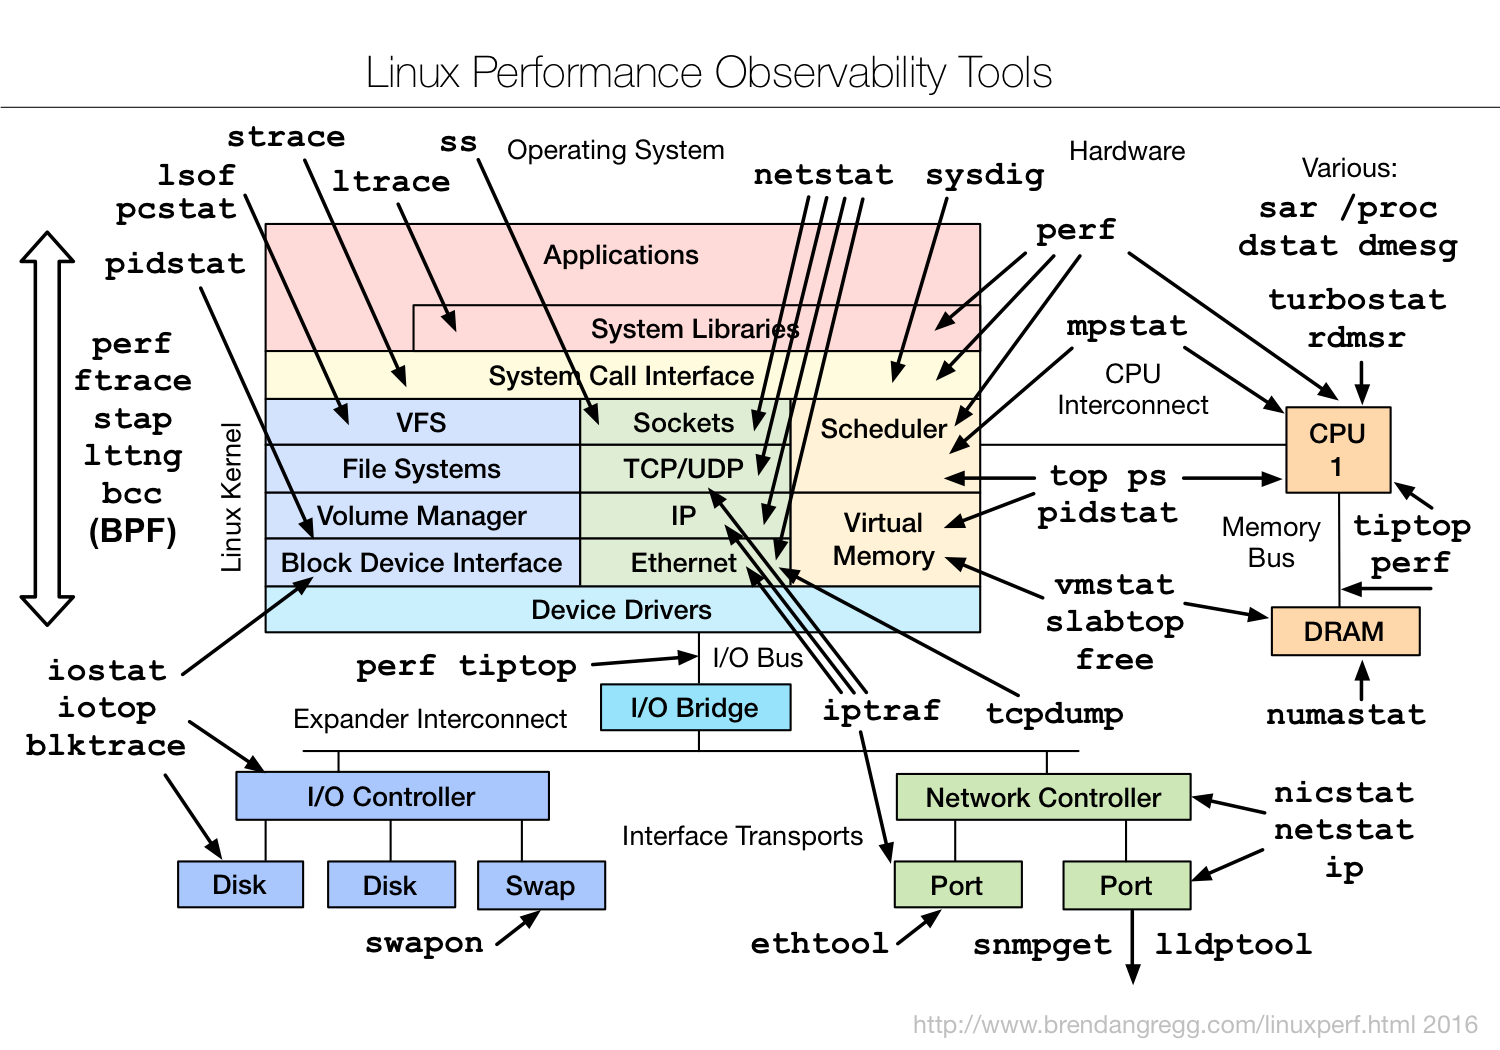 Linux observability tools